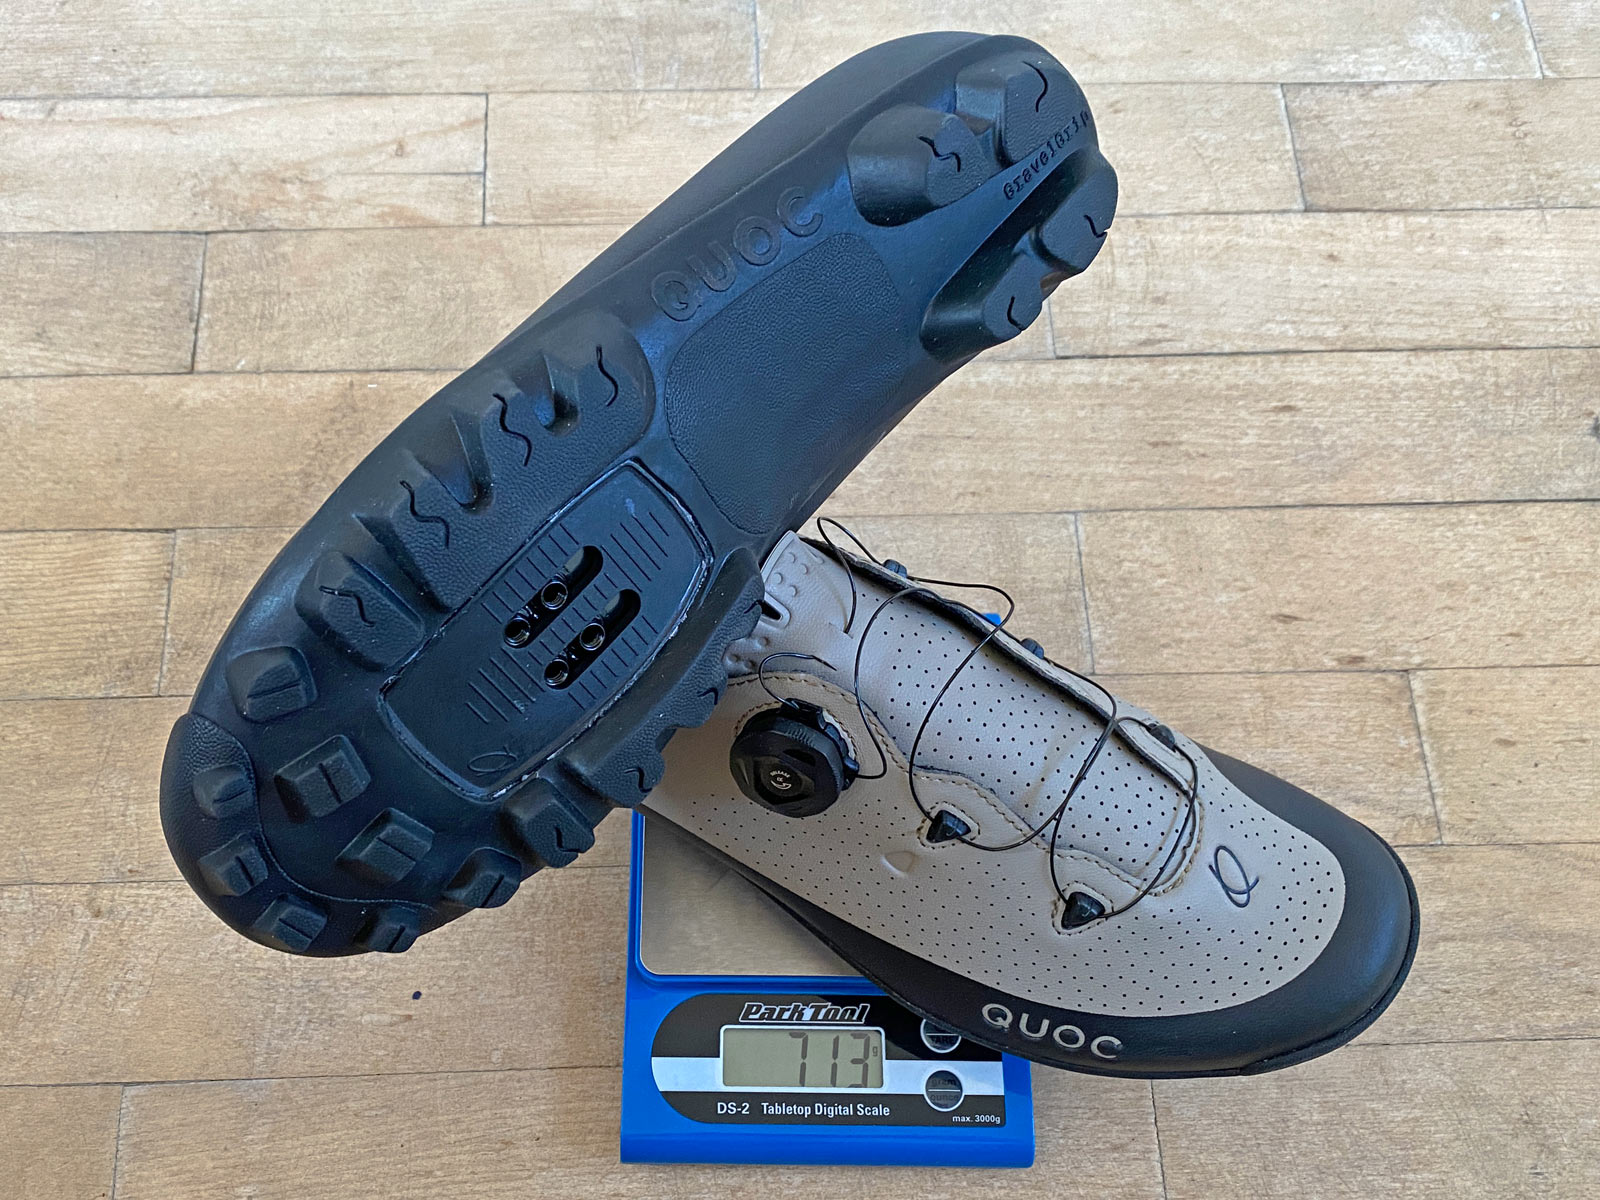 Quoc Gran Tourer II gravel bike shoes updated with dial retention, size 43 713g actual weight